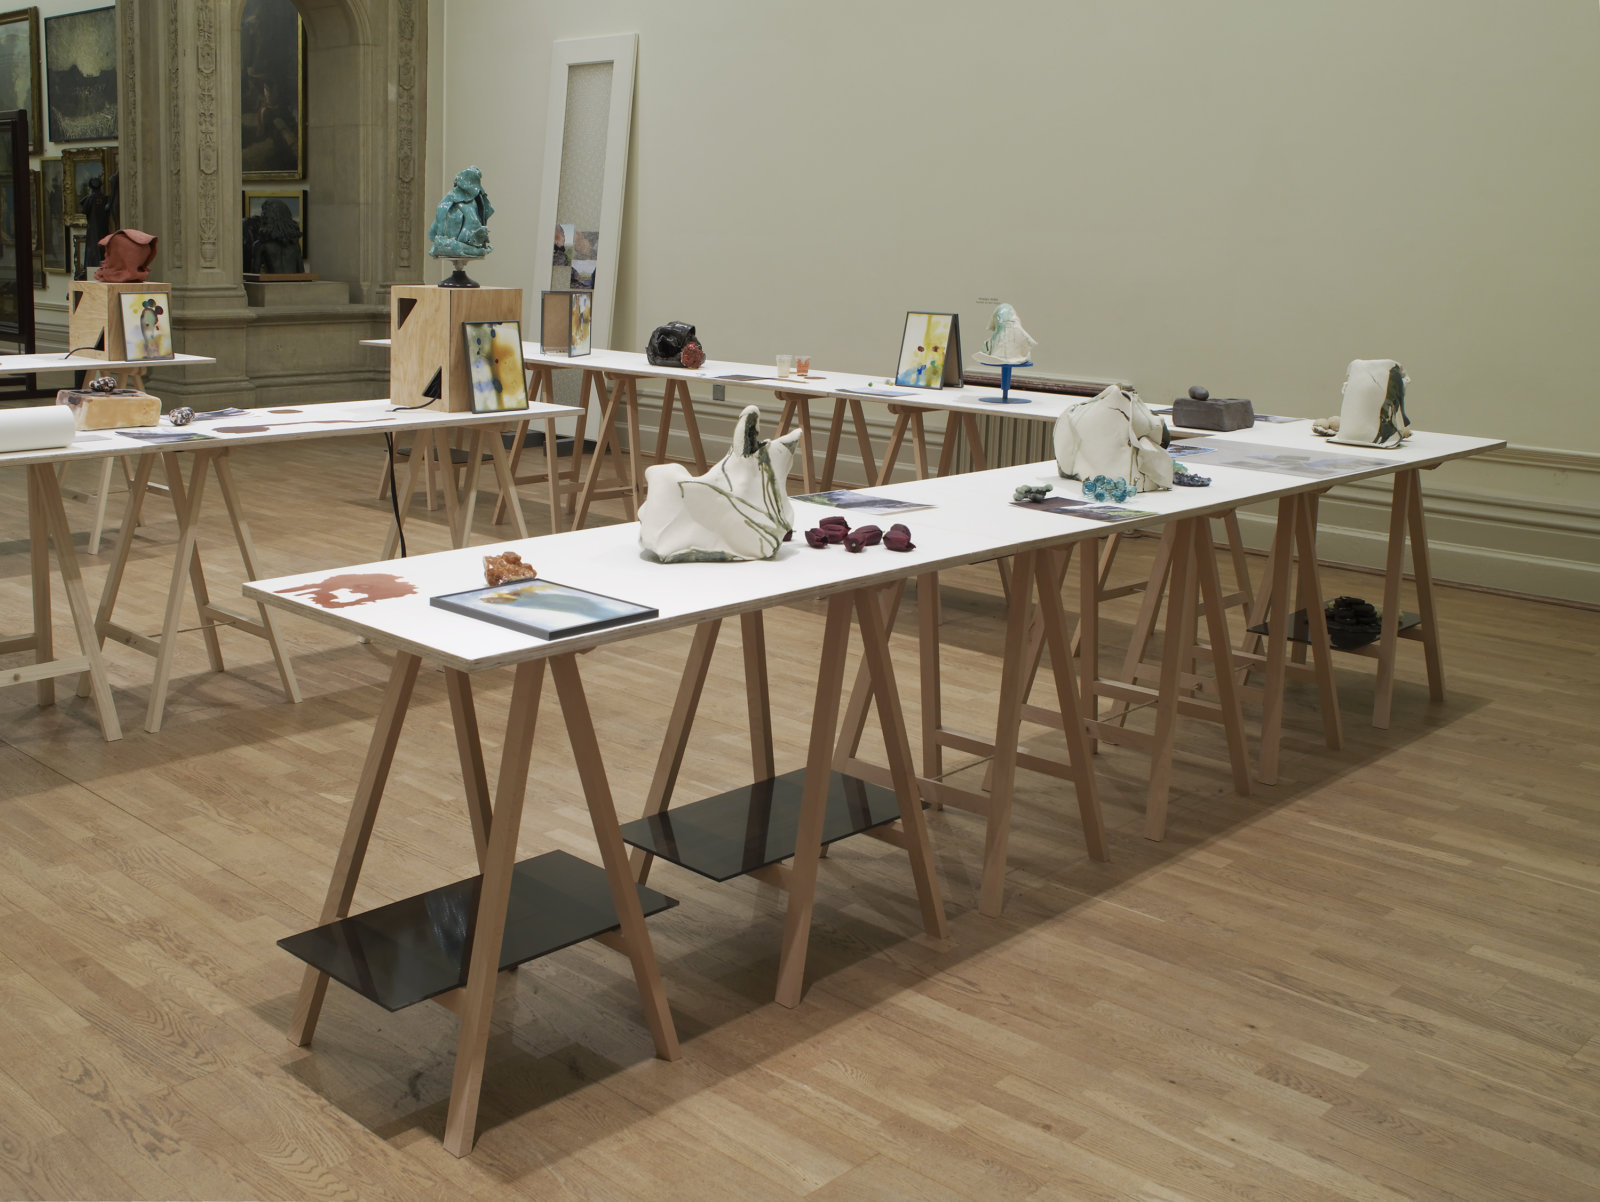 Christina Mackie, The Judges III, 2013, mixed media, dimensions variable. Installation view, Nottingham Castle Museum, 2013